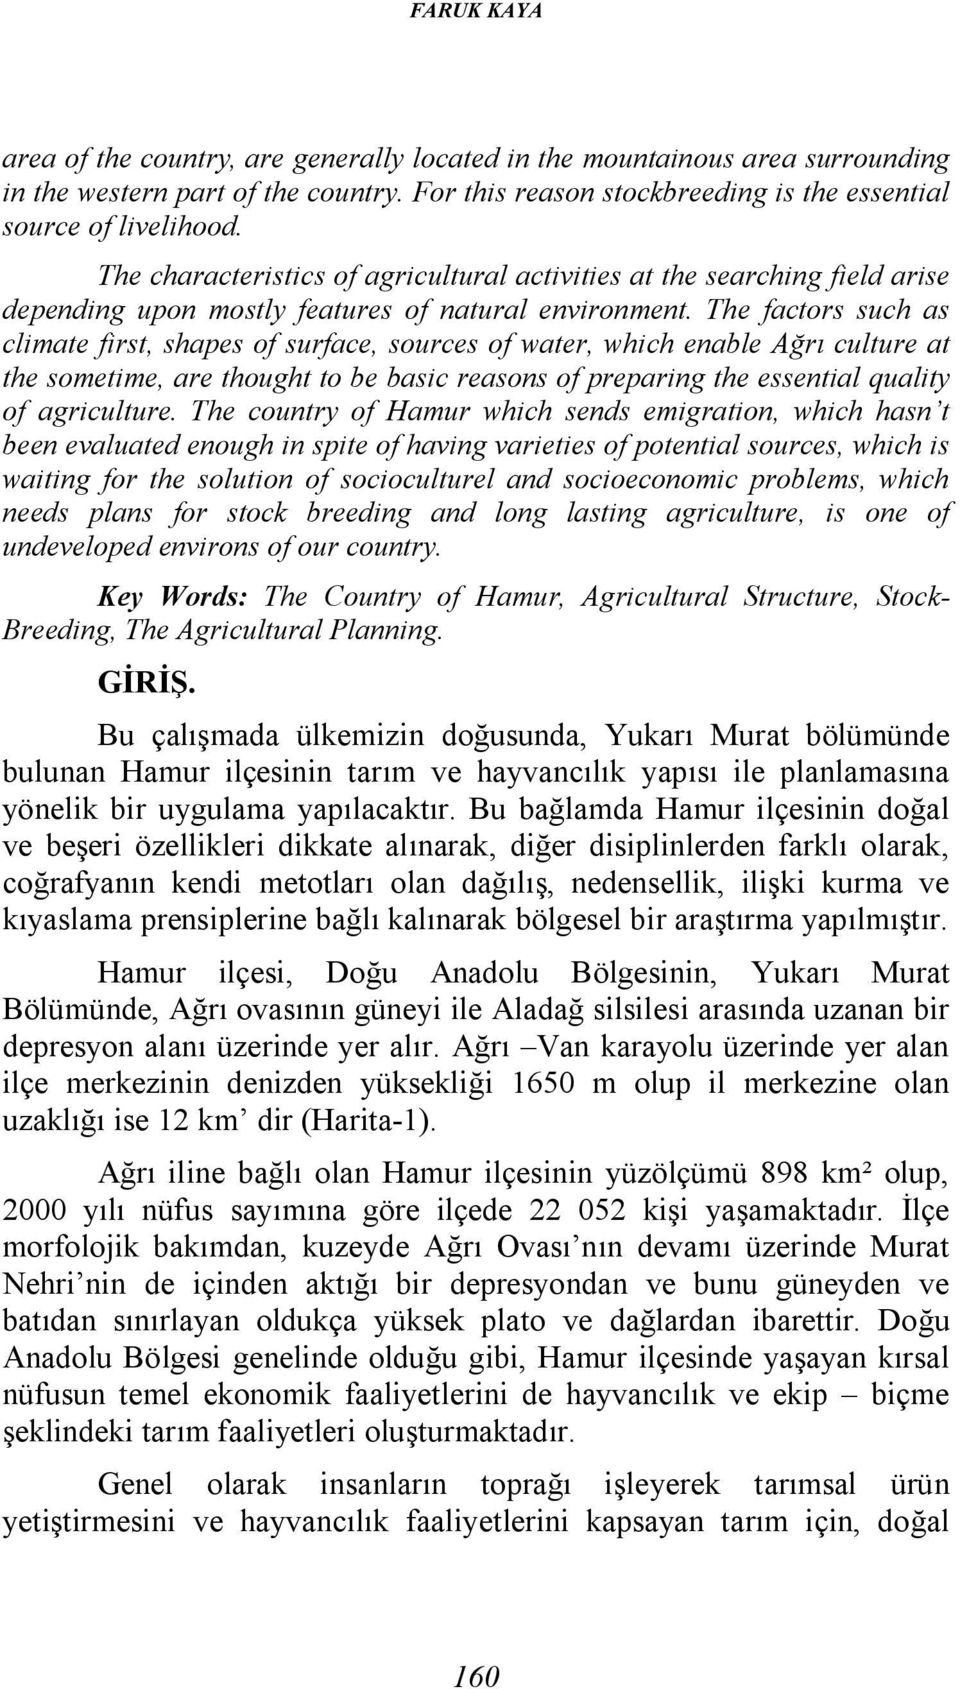 The factors such as climate first, shapes of surface, sources of water, which enable Ağrı culture at the sometime, are thought to be basic reasons of preparing the essential quality of agriculture.